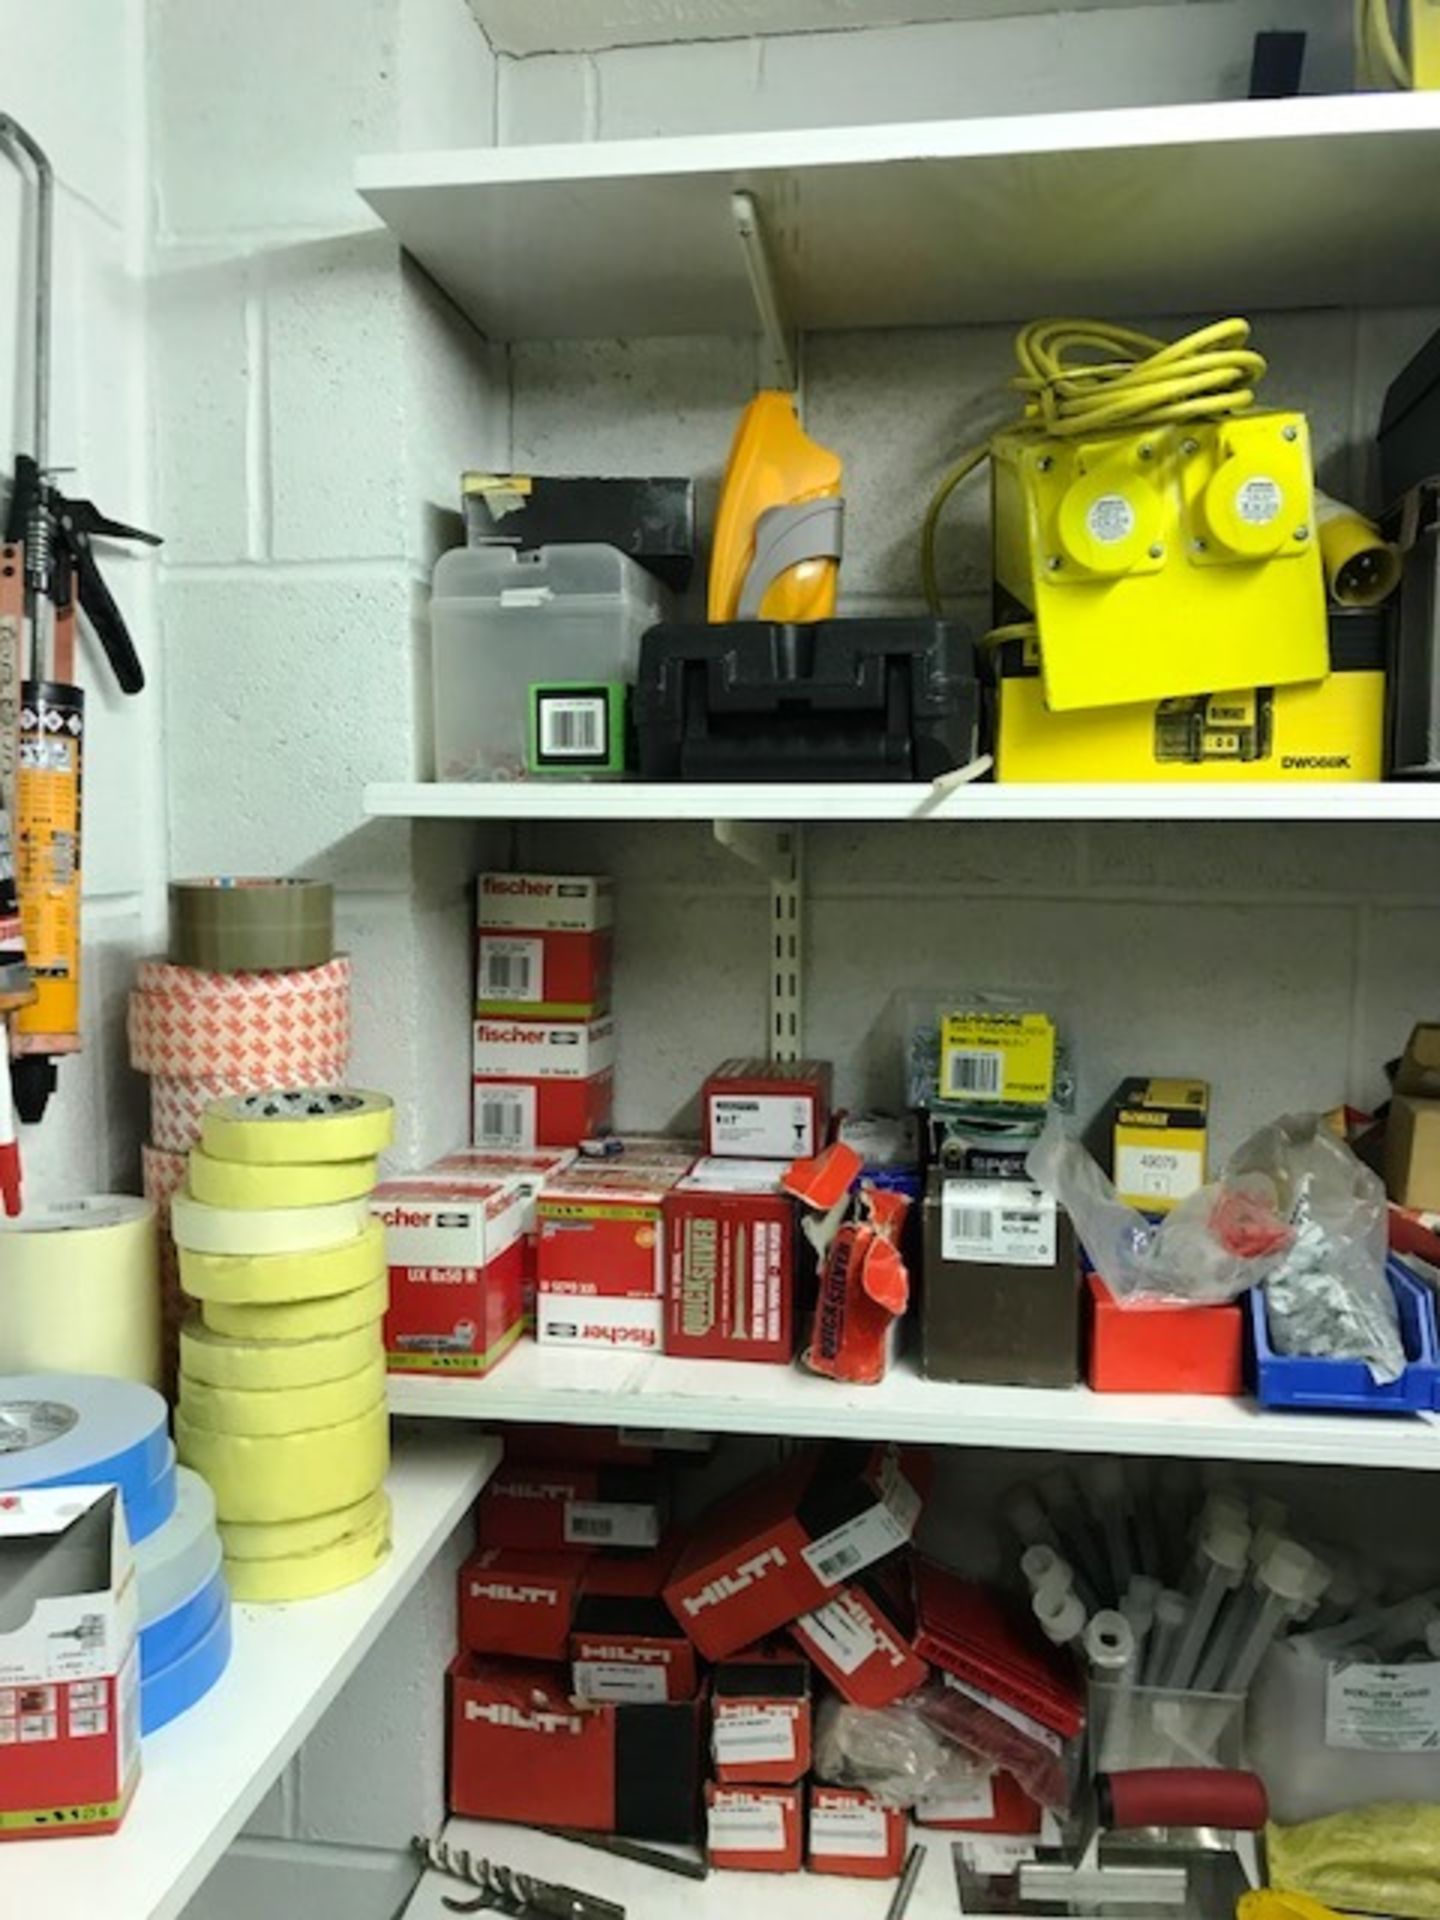 Contents of Store Room - As pictured - Image 12 of 12